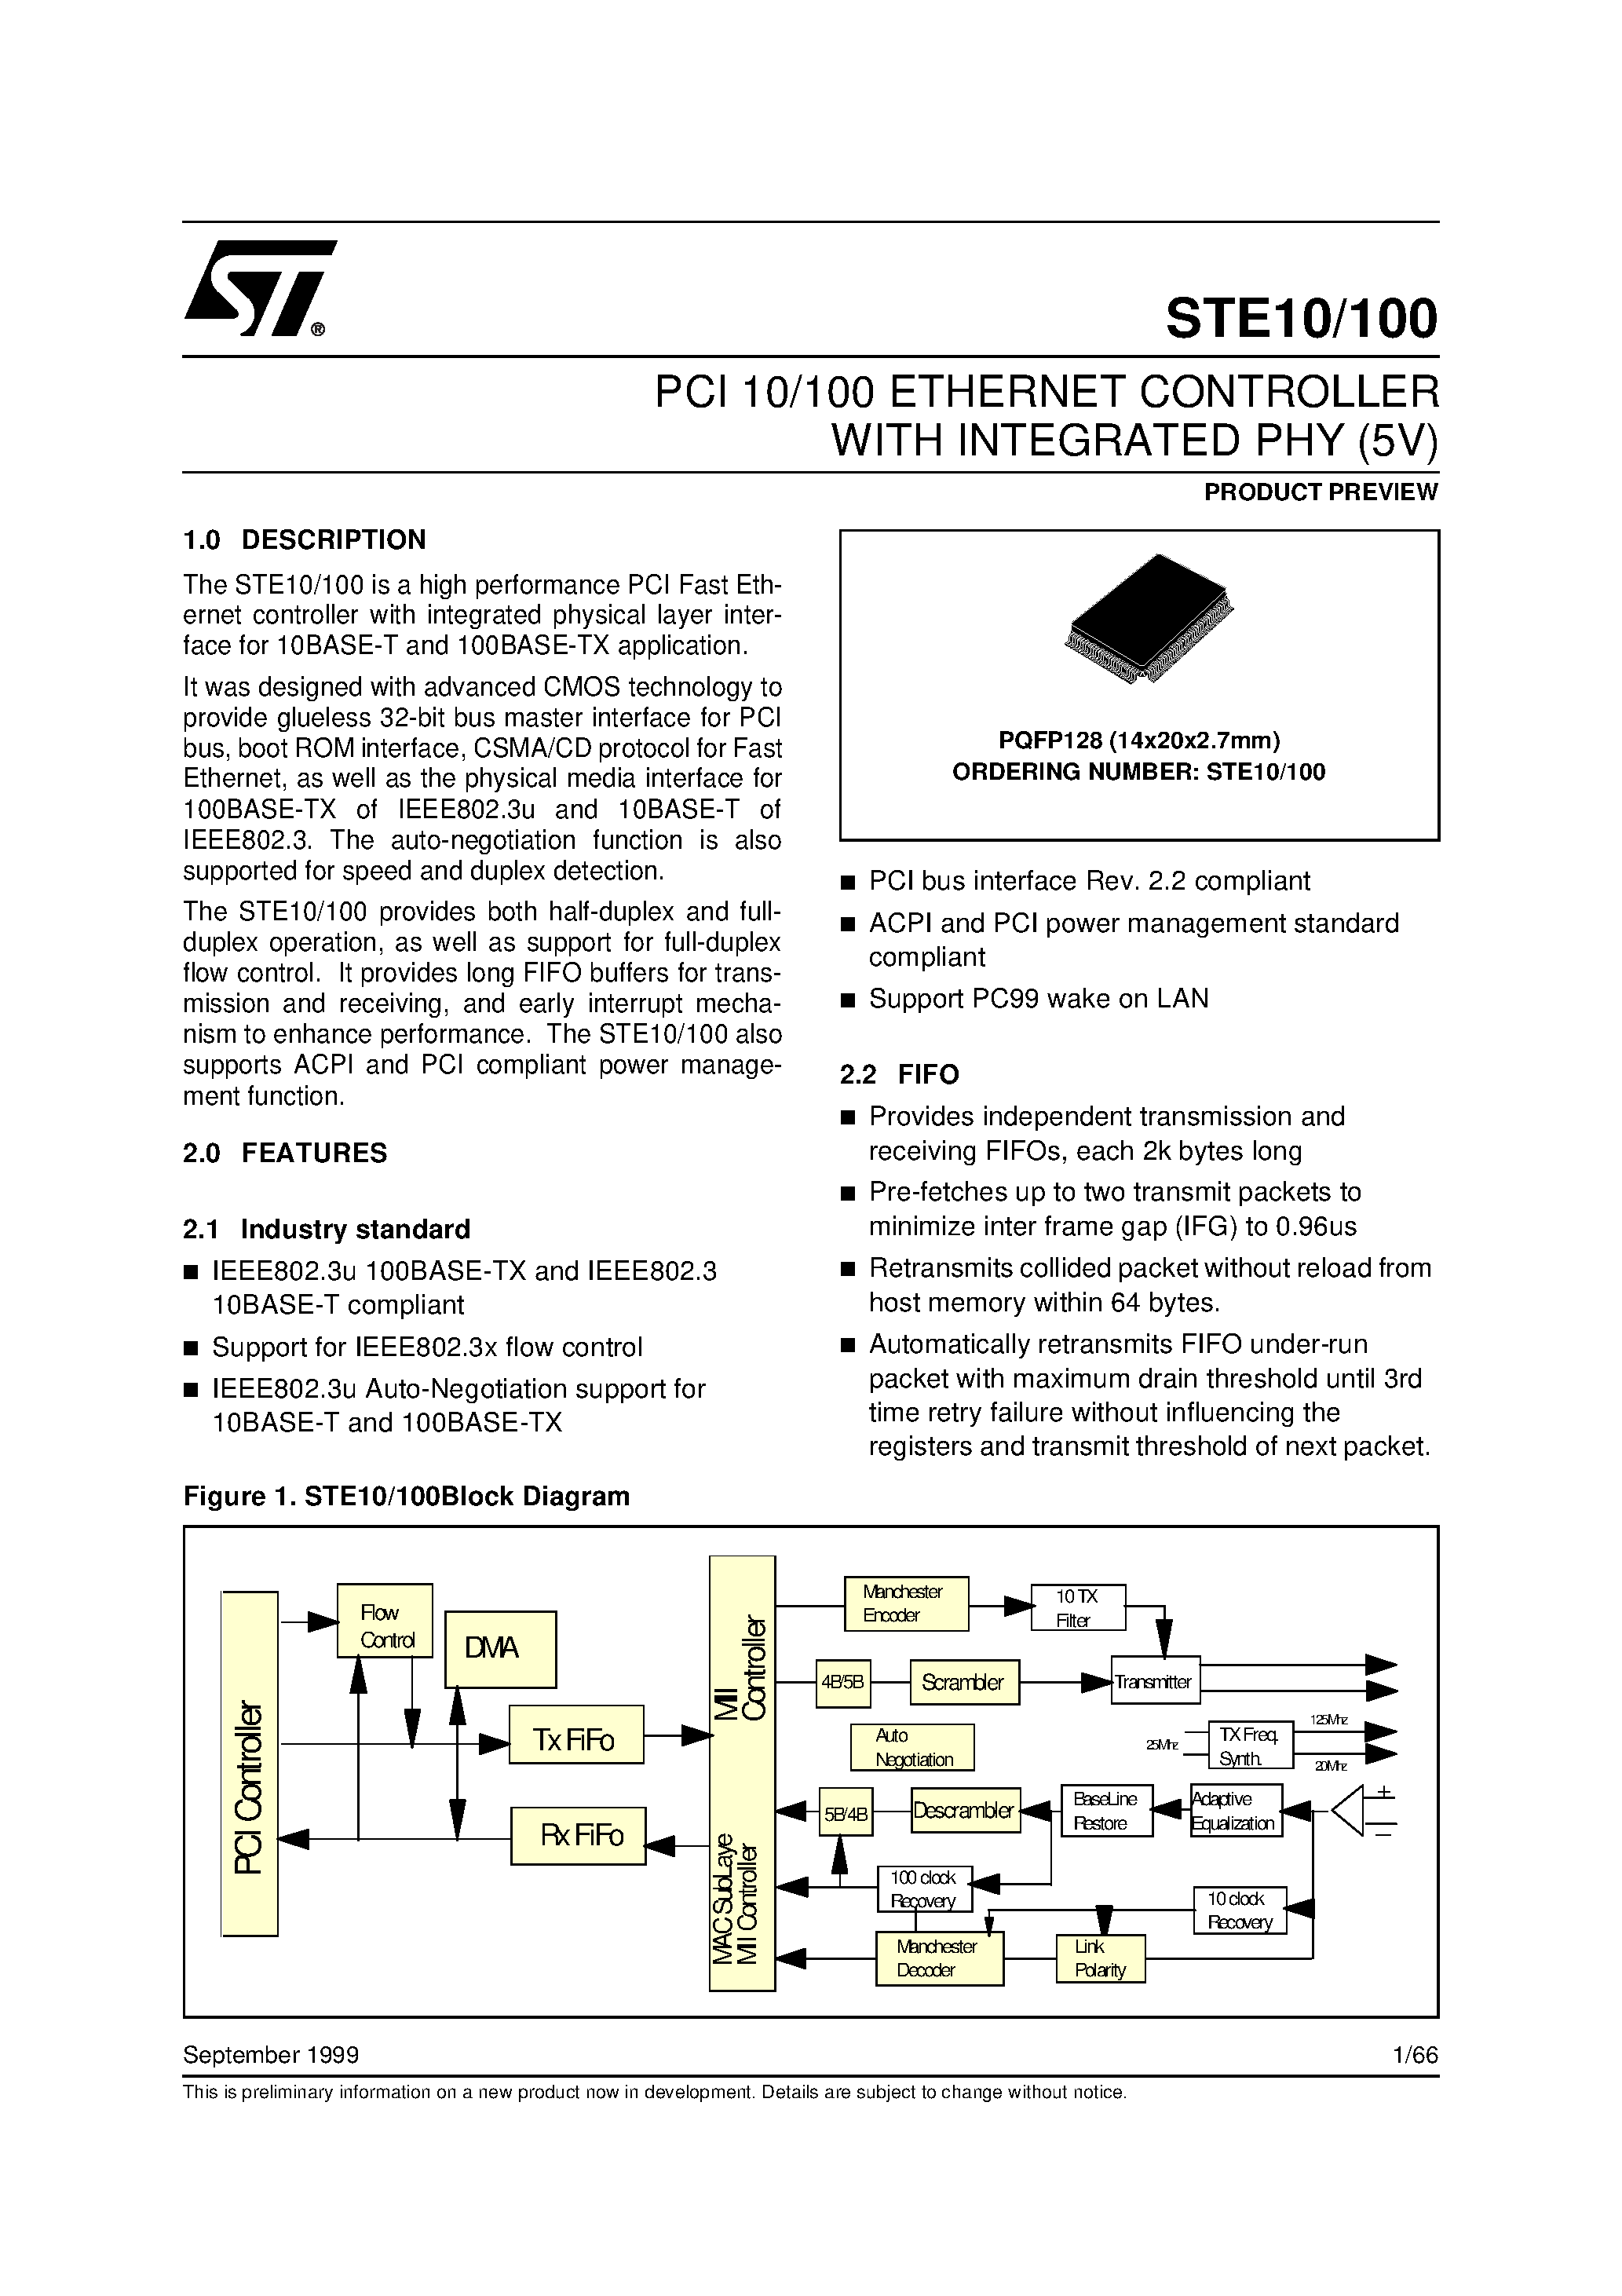 Даташит STE10/100 - PCI 10/100 ETHERNET CONTROLLER WITH INTEGRATED PHY 5V страница 1